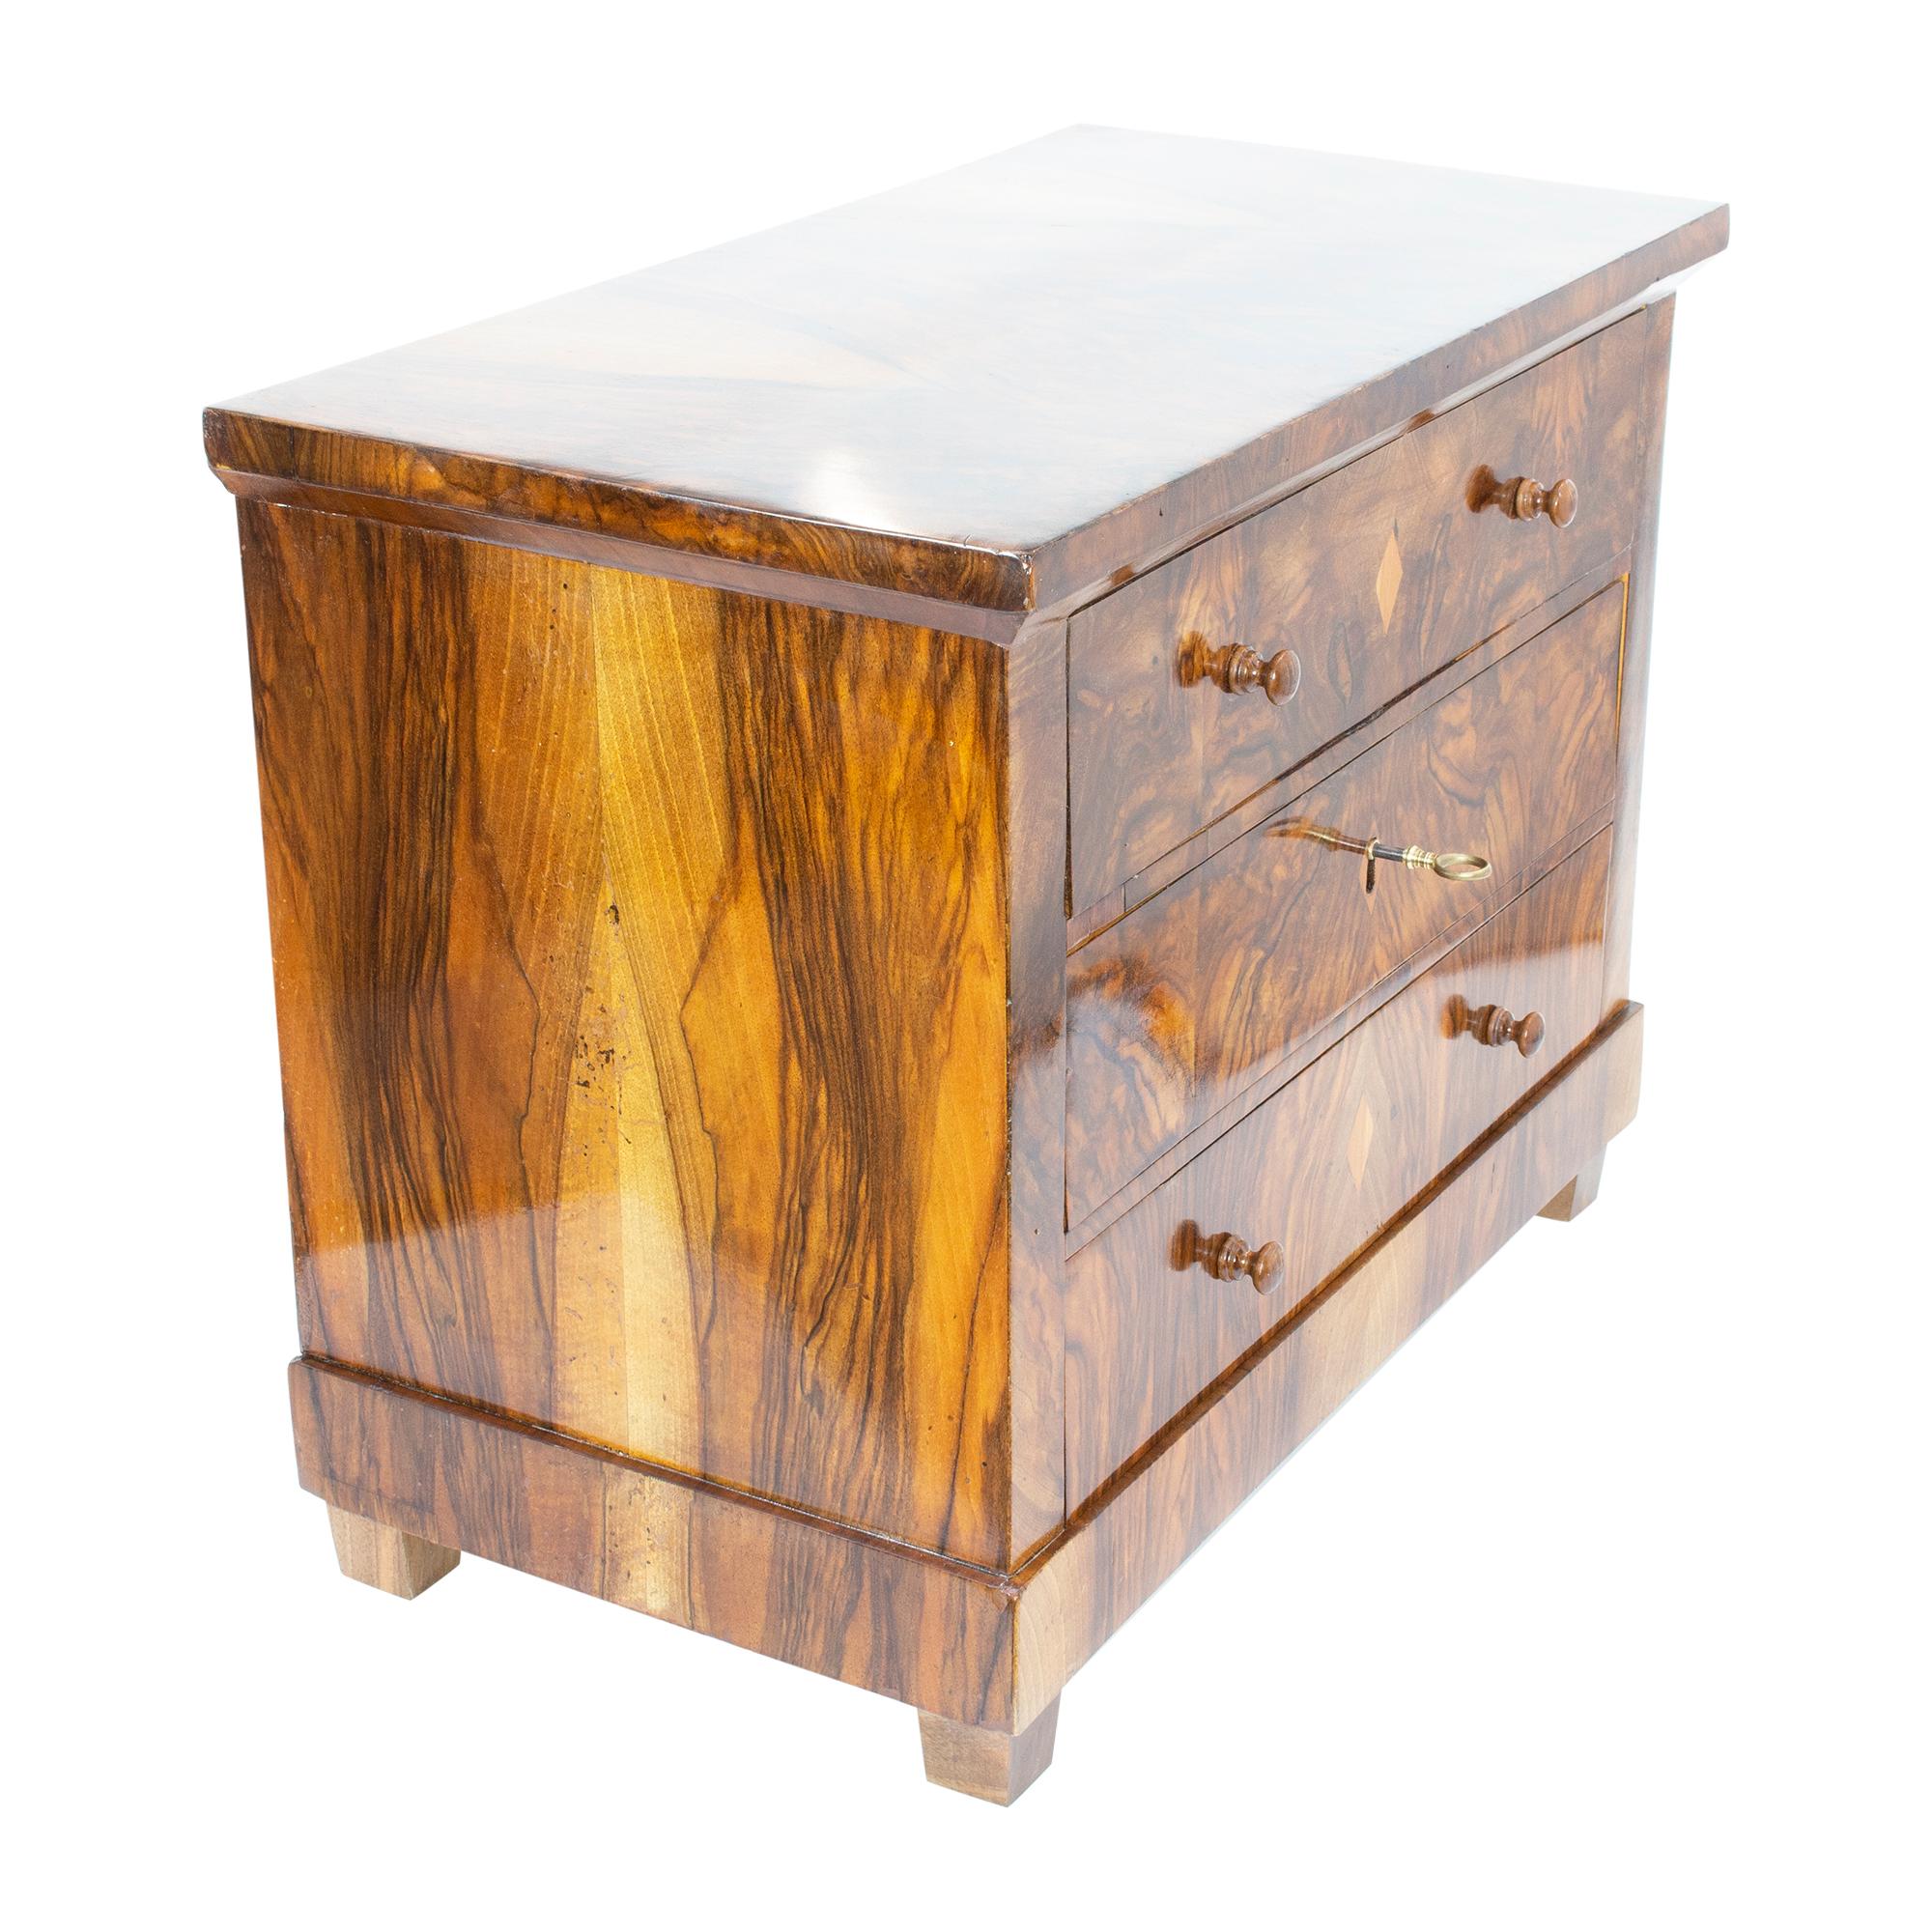 The miniature or model chest of drawers dates back to the Biedermeier period and was made with walnut veneer on a softwood body. The chest of drawers is in very good restored condition. The middle drawer is lockable. The feet of the chest of drawers